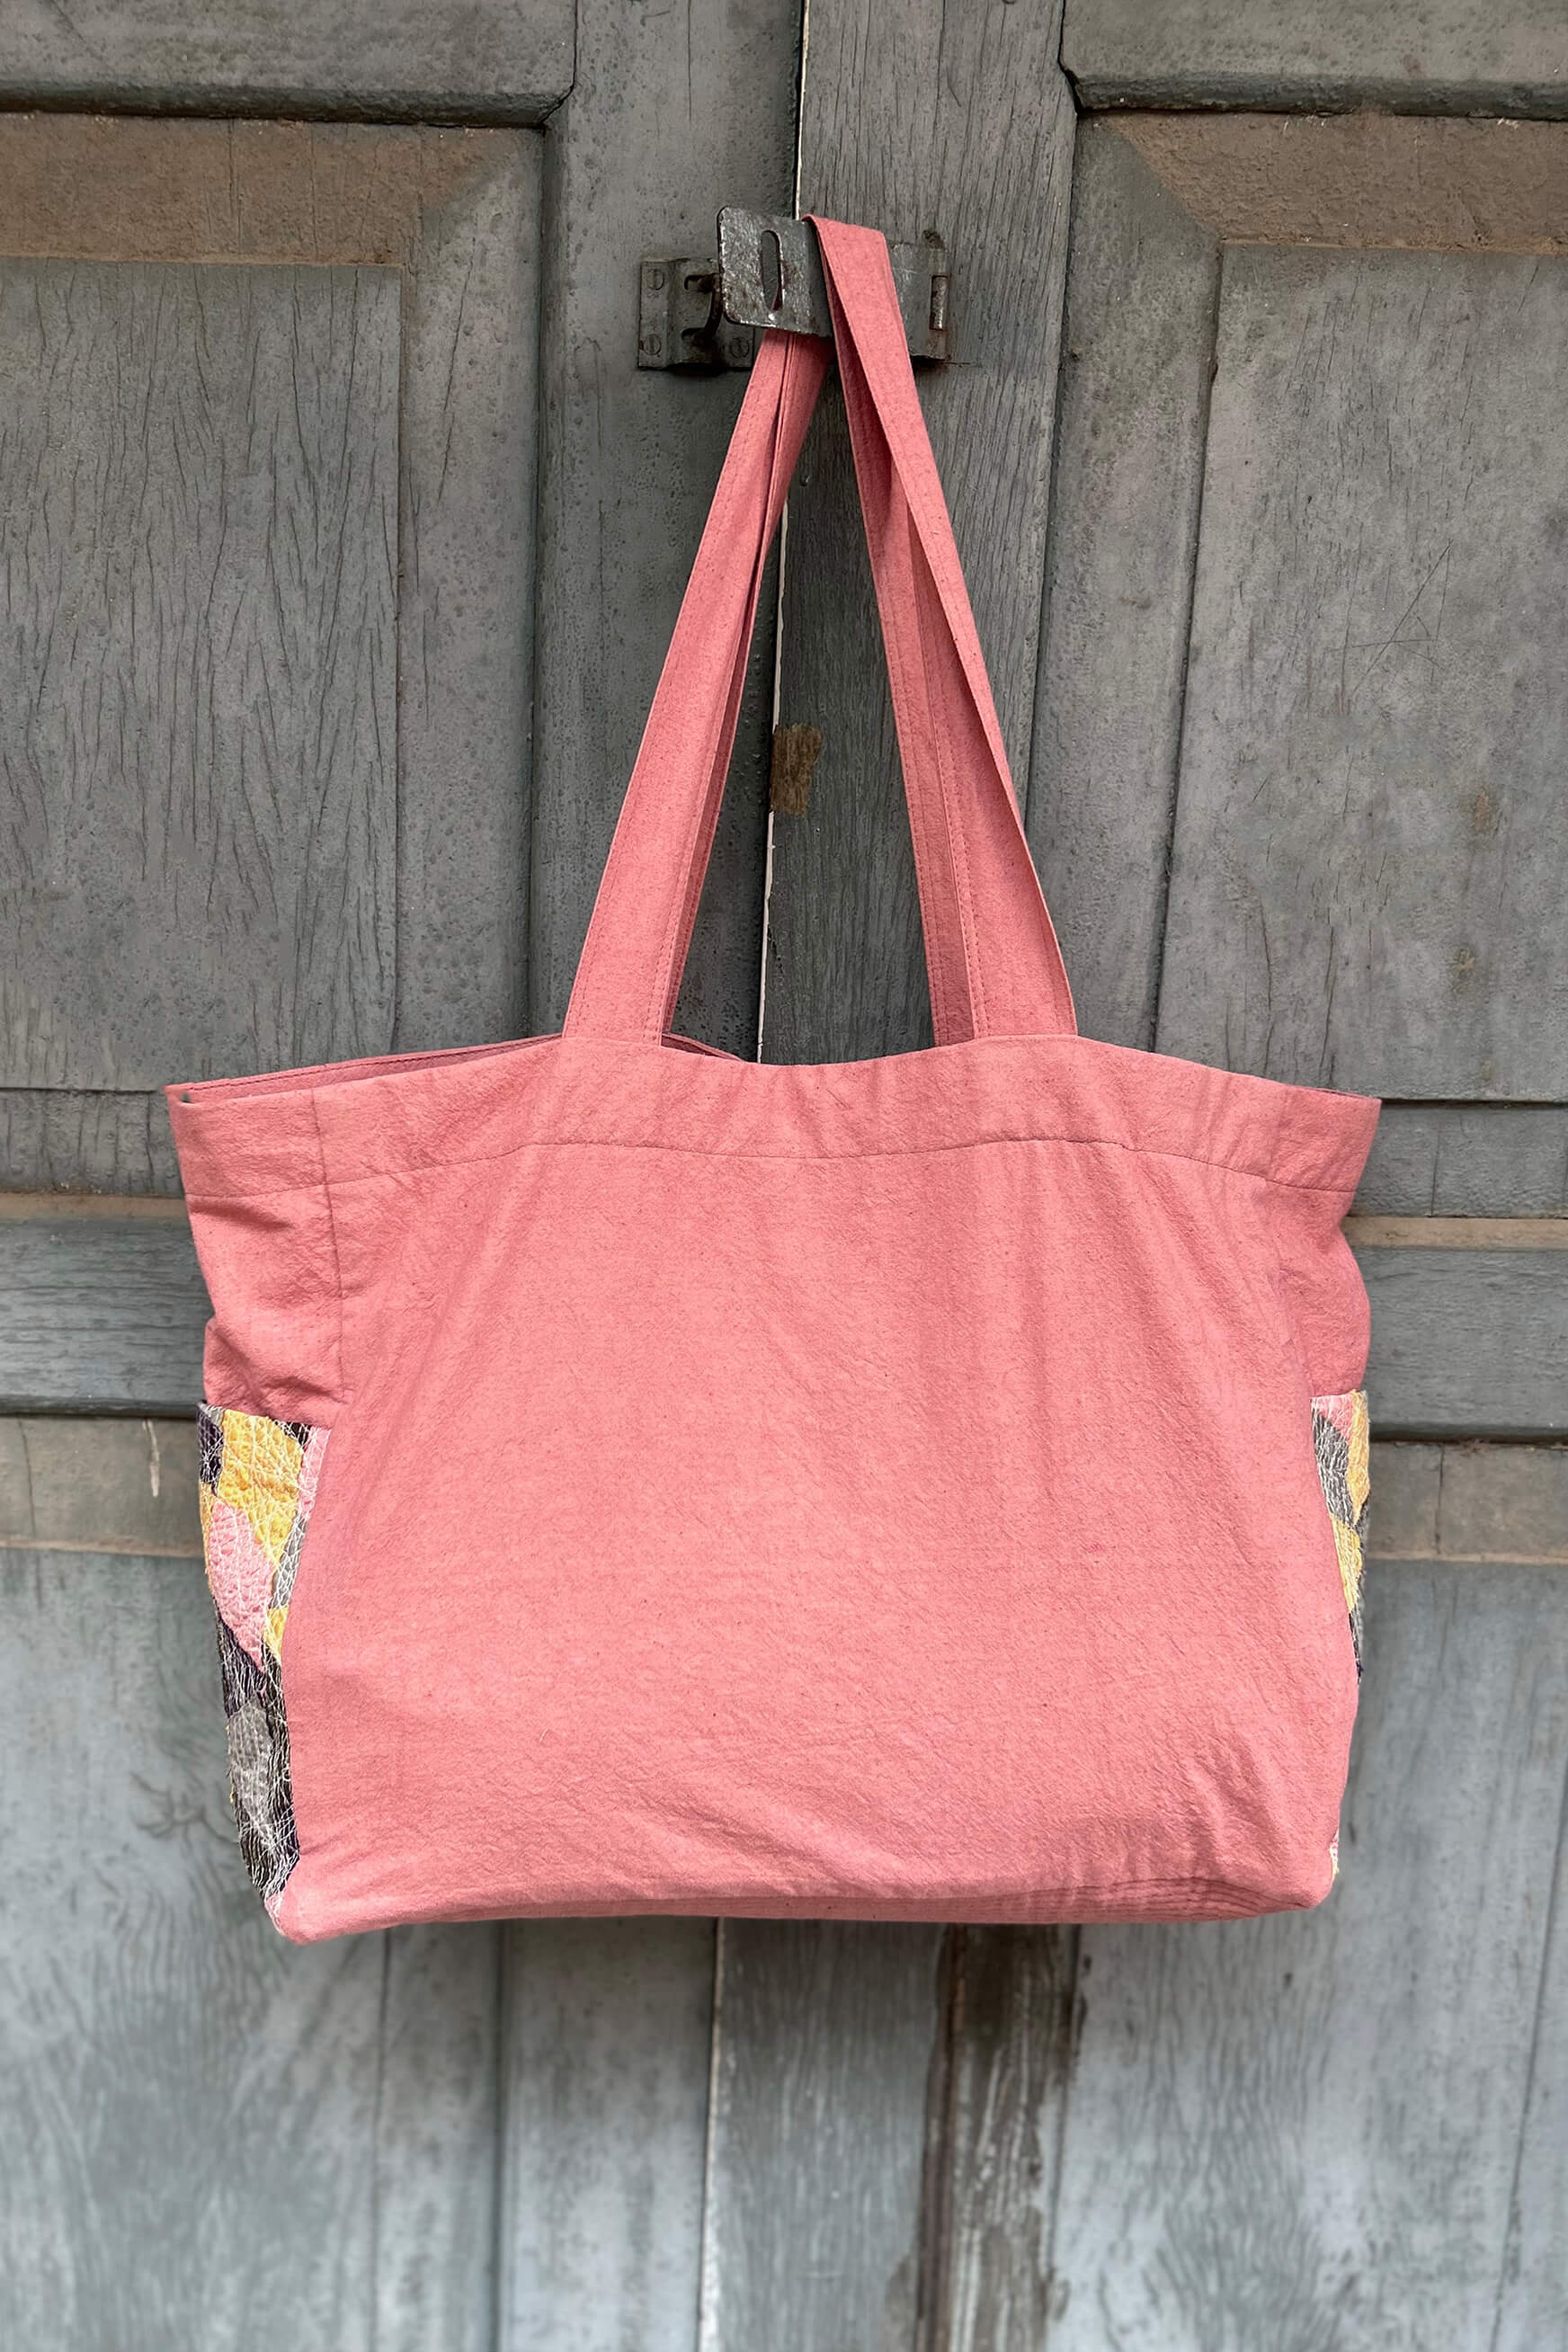 Dusty Pink Cotton Tote Bag with Chindi Side Pockets.